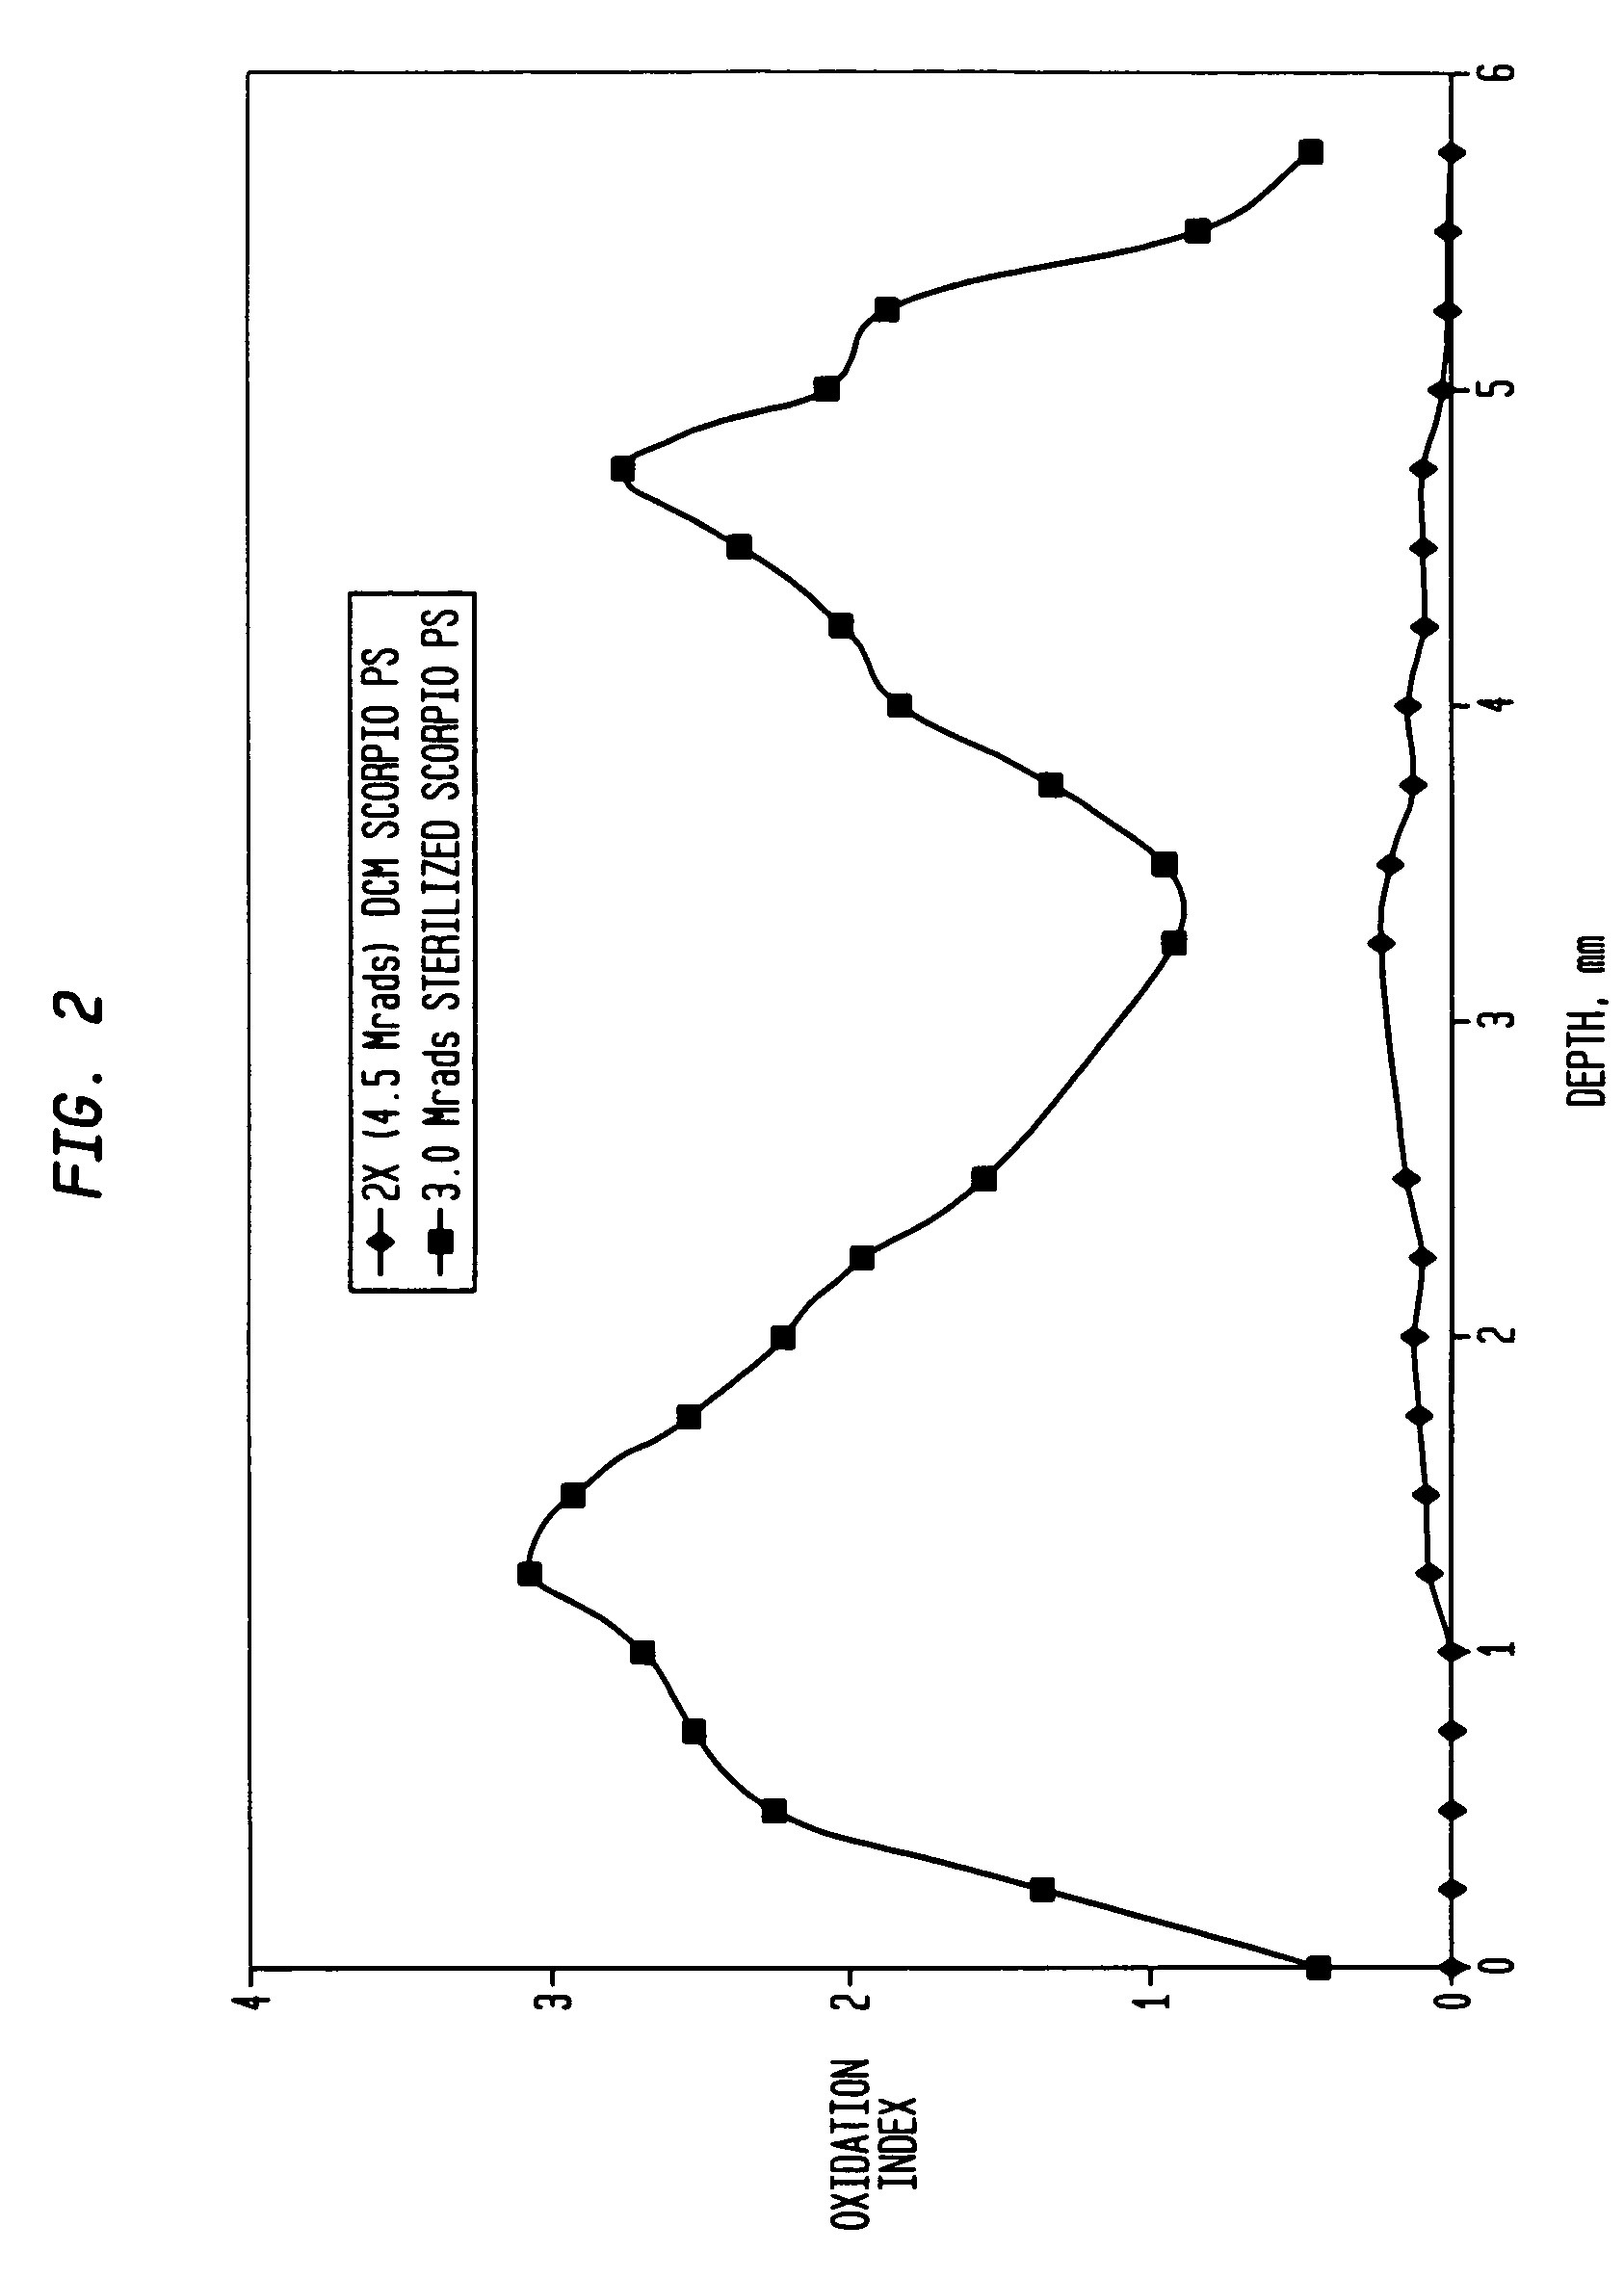 Sequentially cross-linked polyethylene